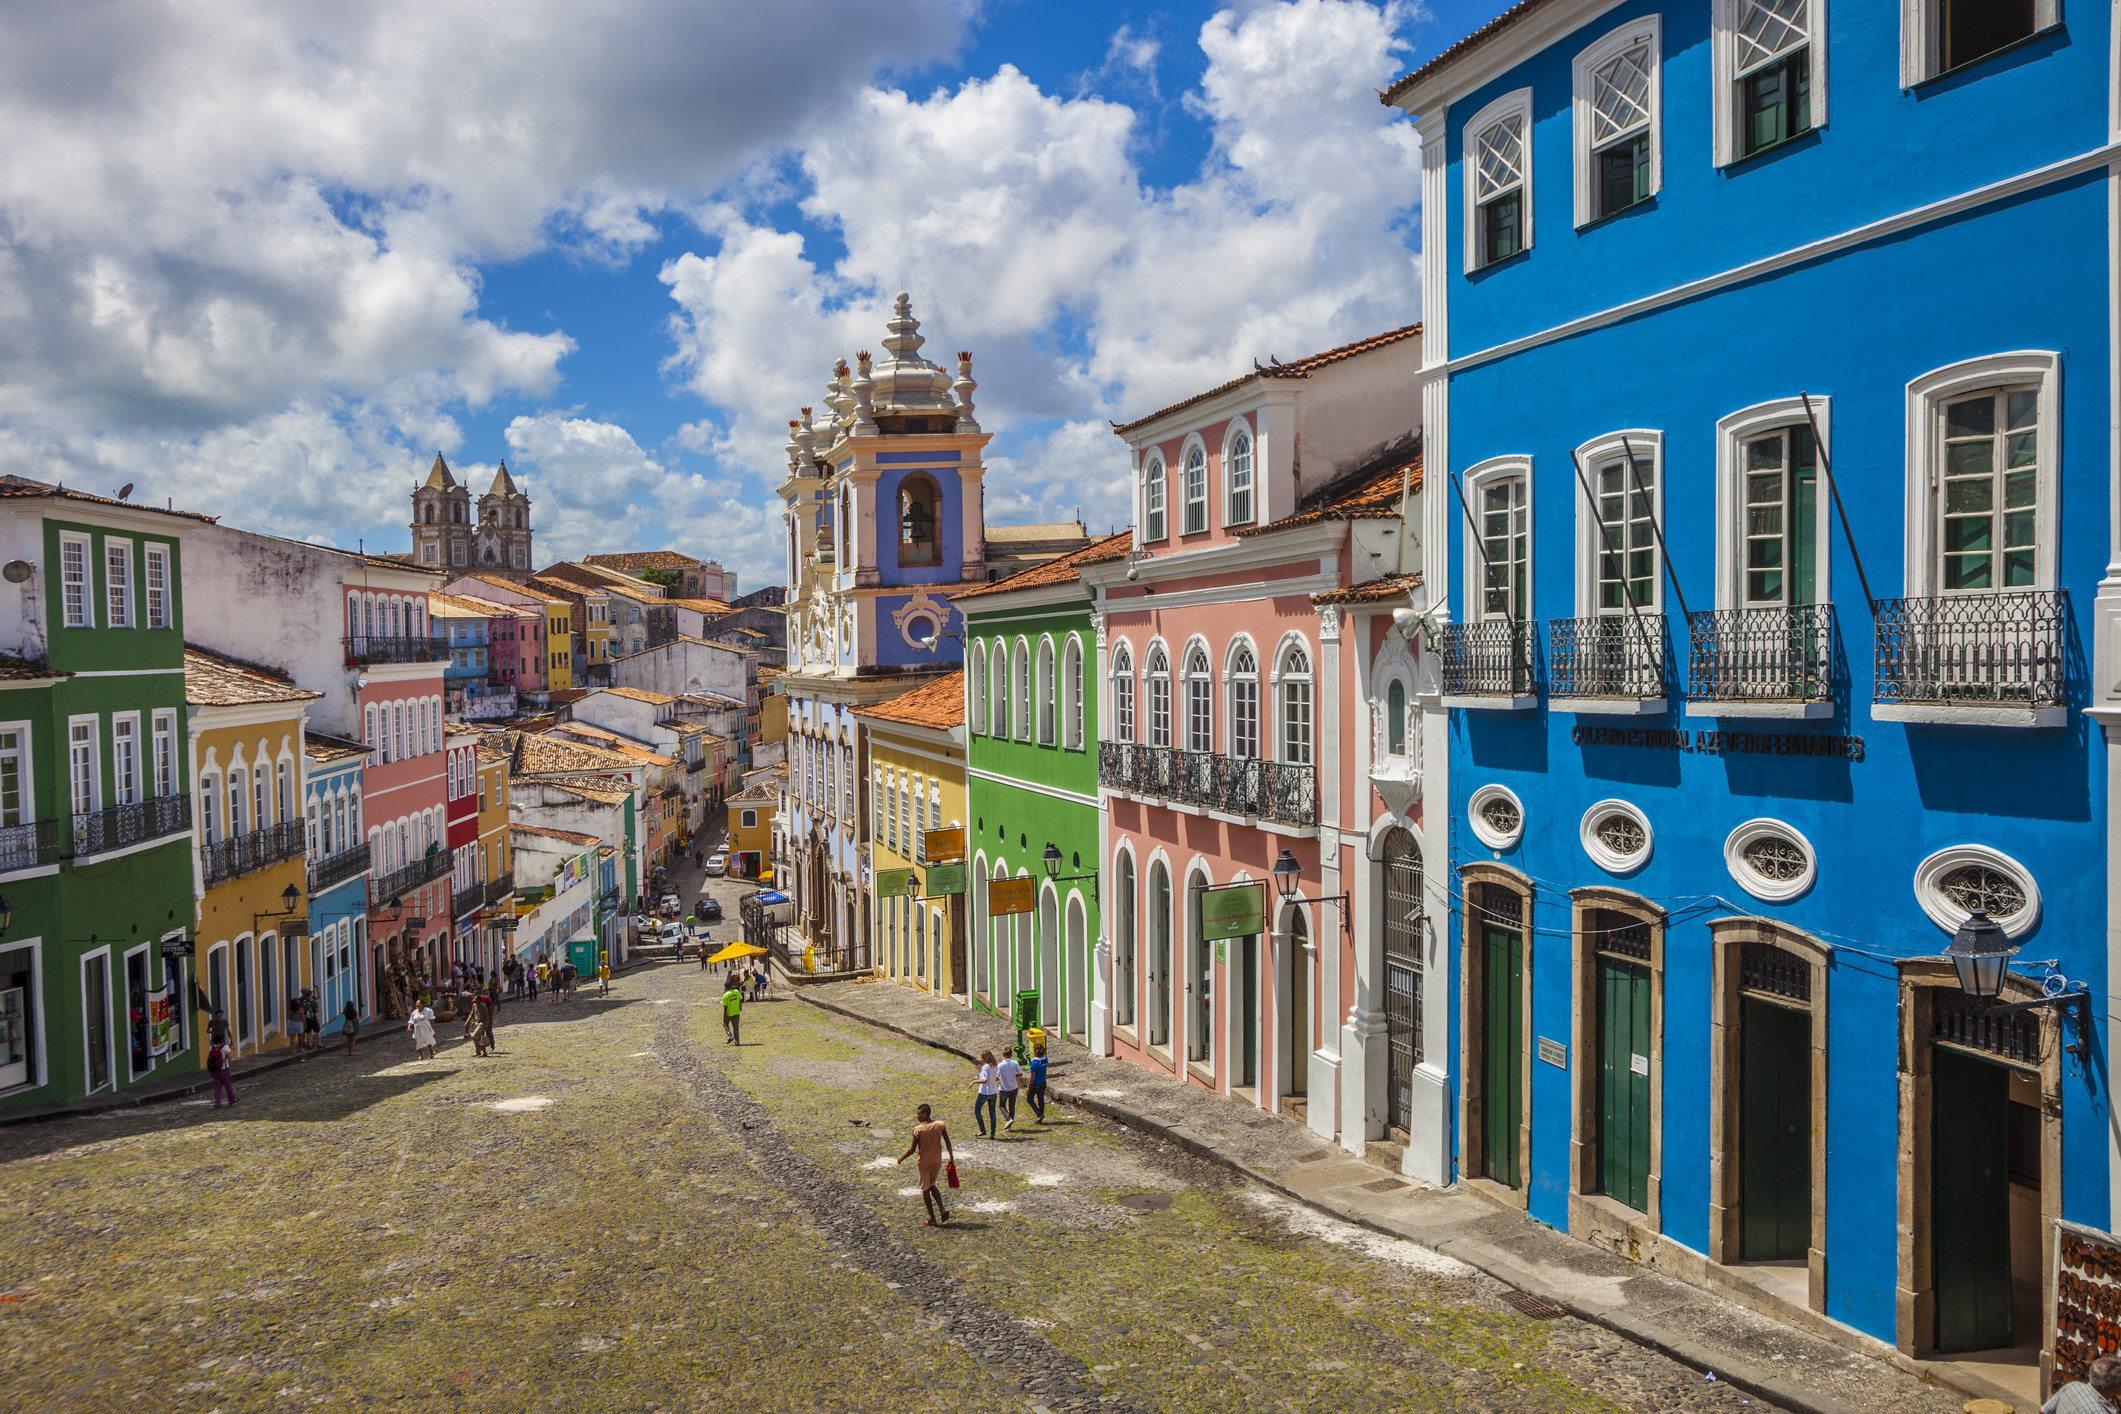 Colorful buildings in a Brazilian city.